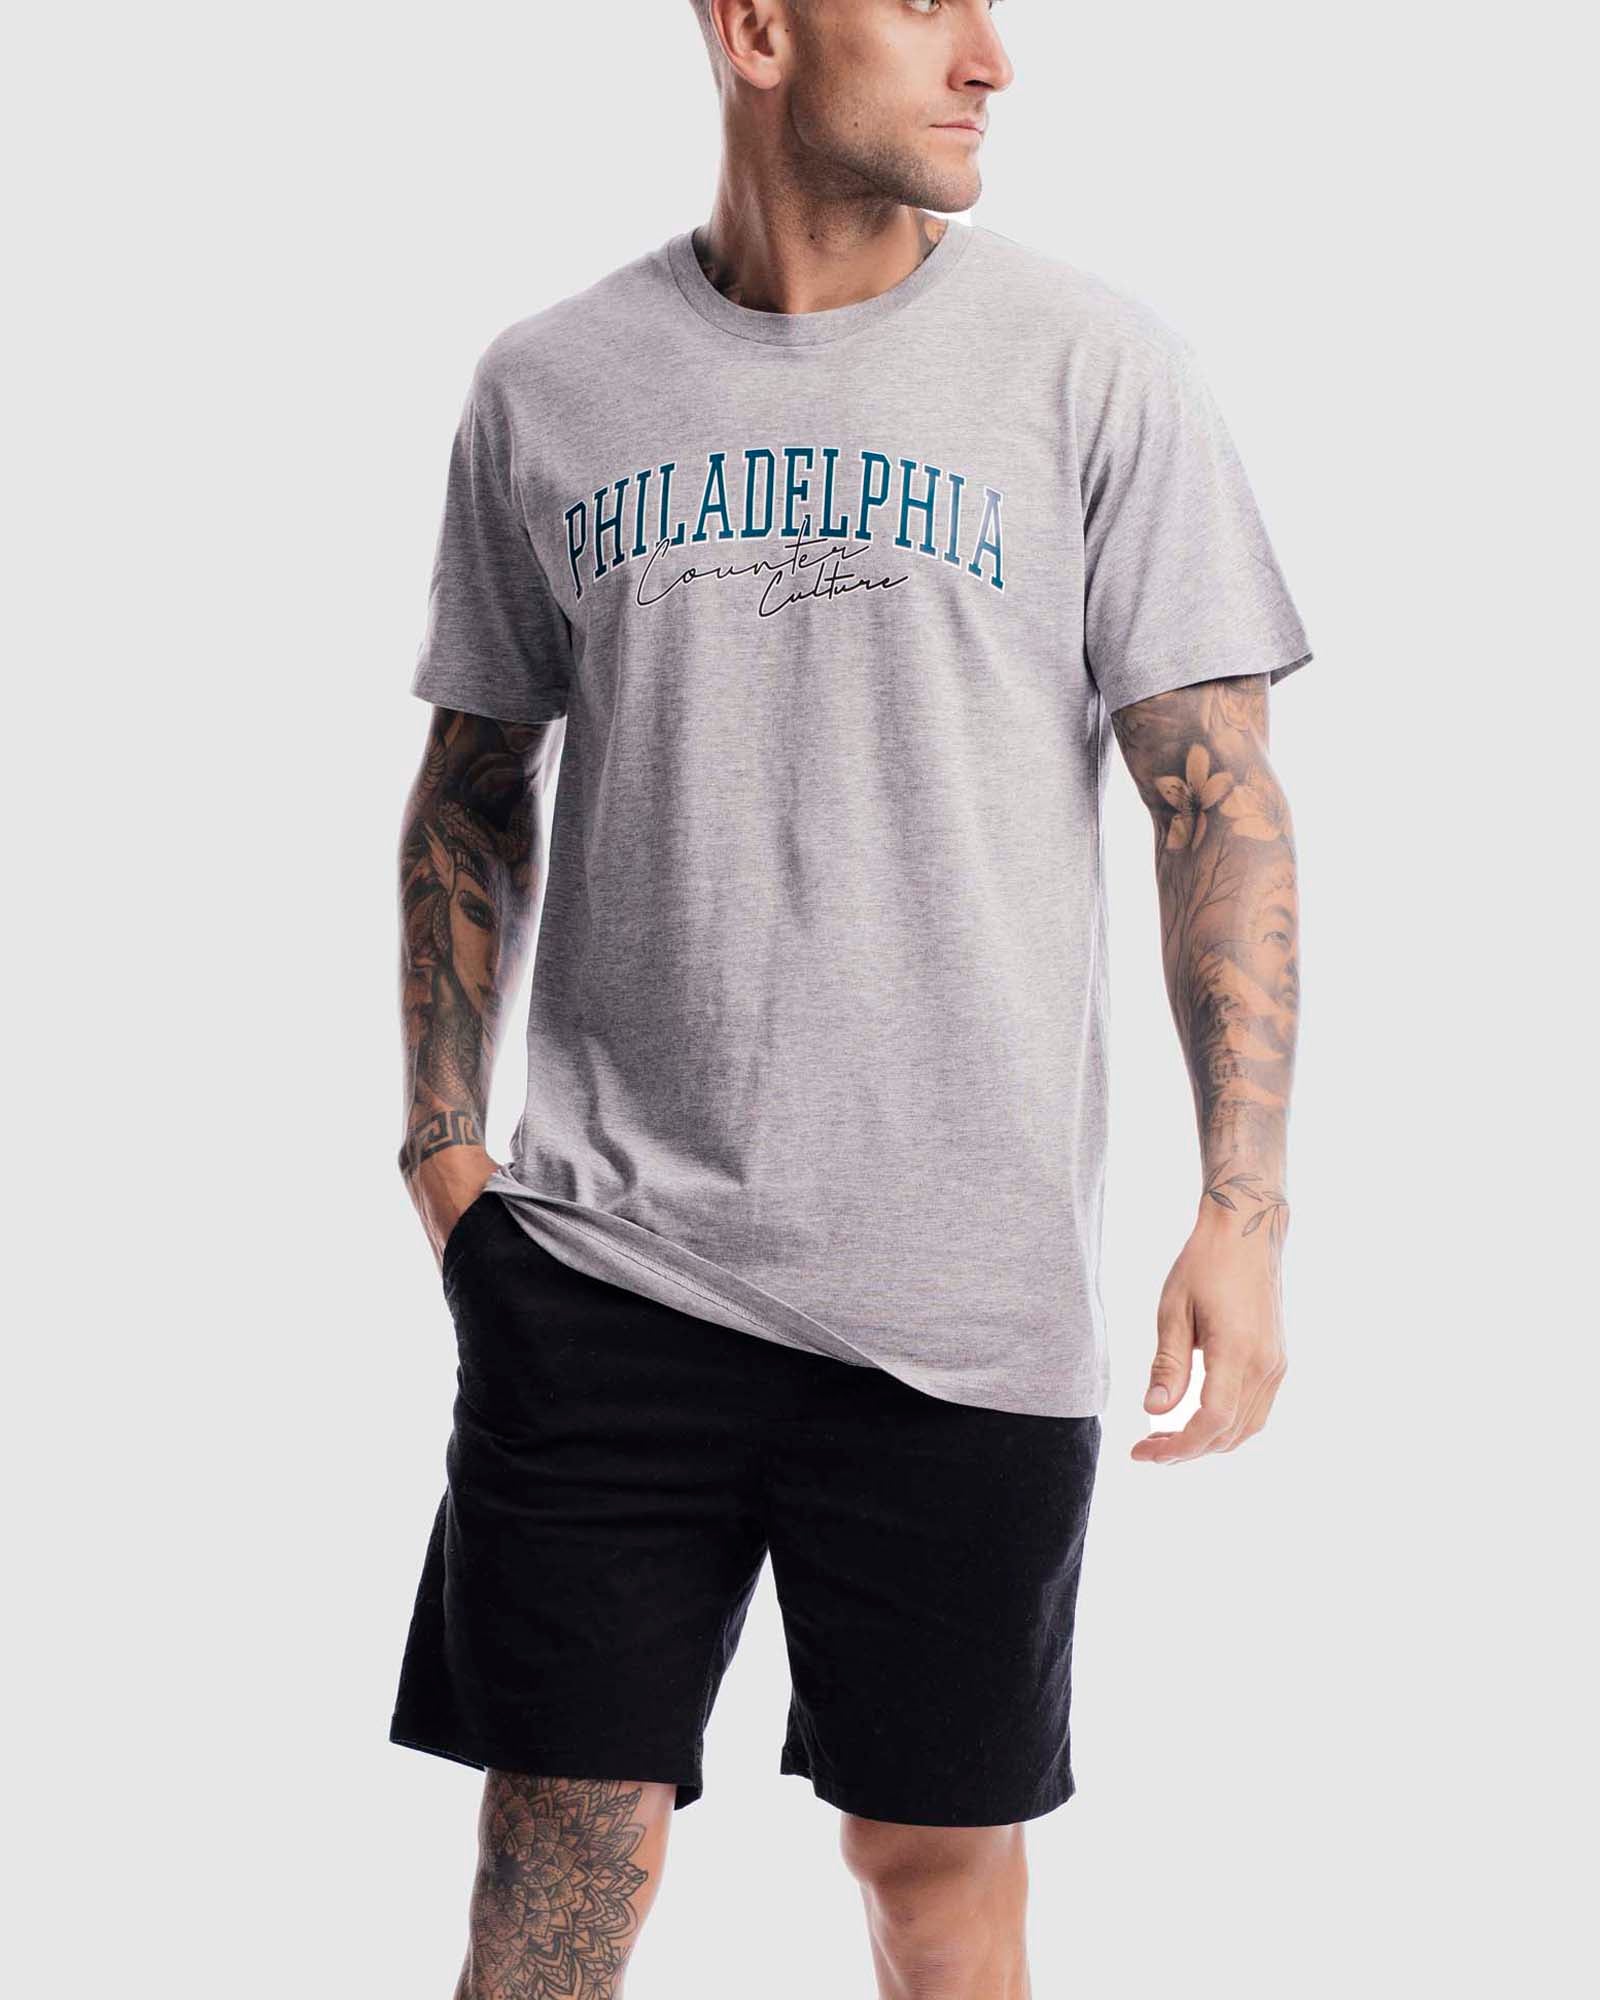 Philly Tee